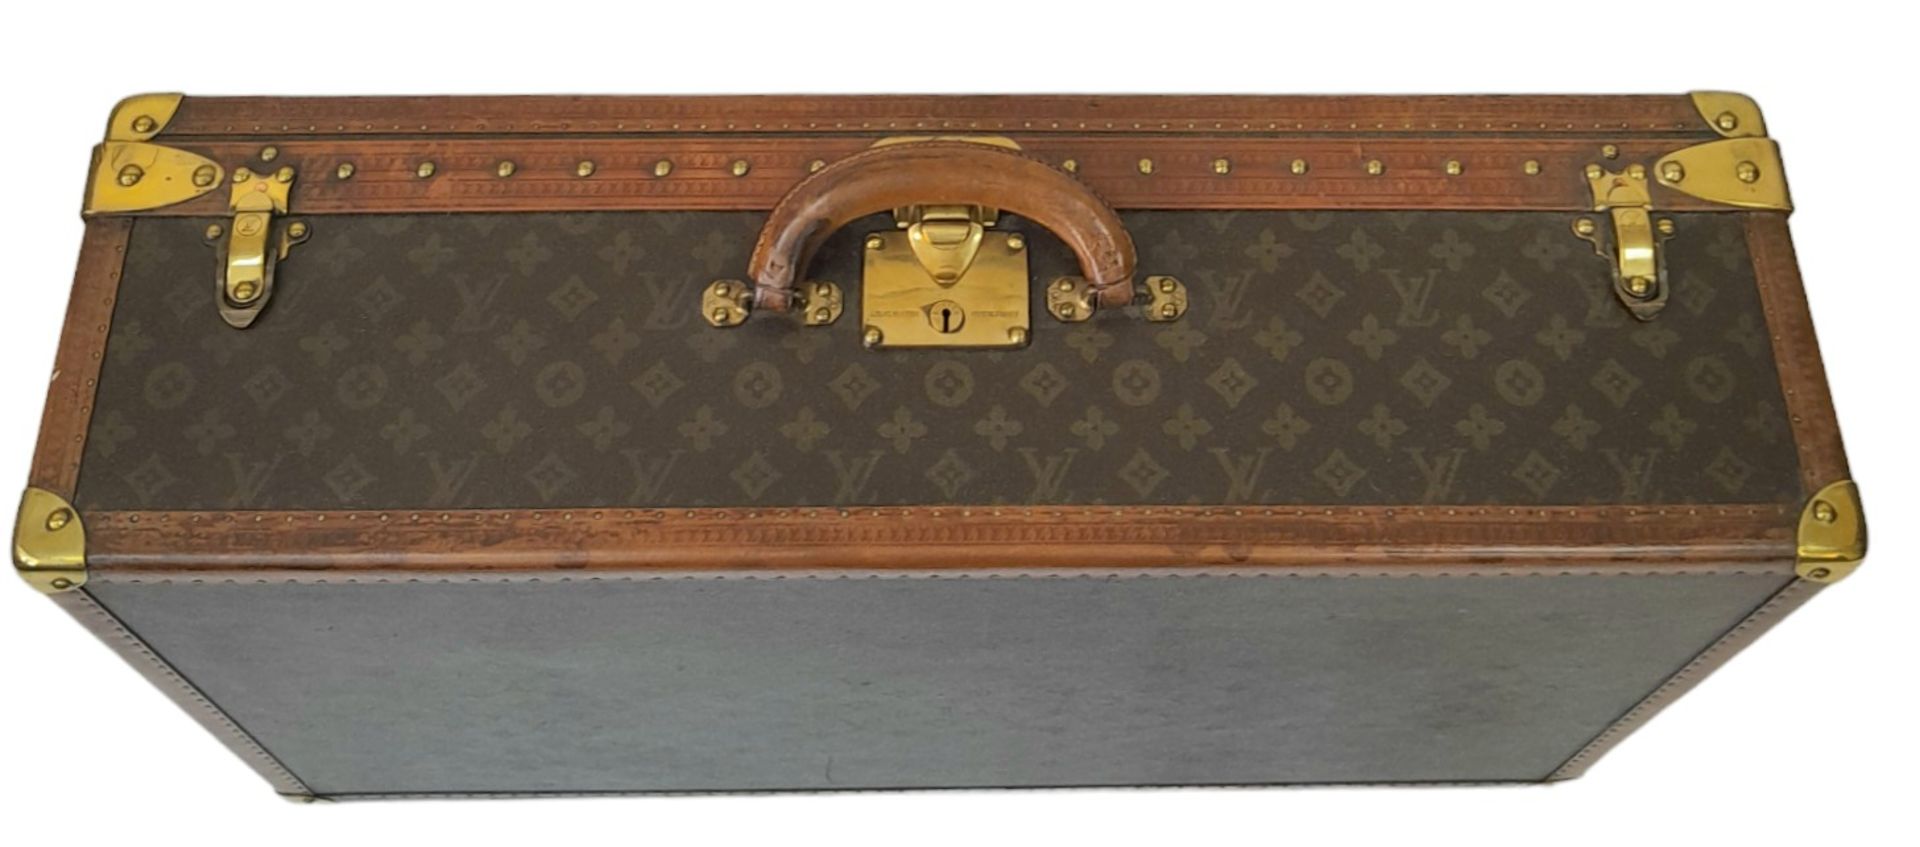 A Vintage Possibly Antique Louis Vuitton Trunk/Hard Suitcase. Canvas monogram LV exterior with - Image 5 of 16